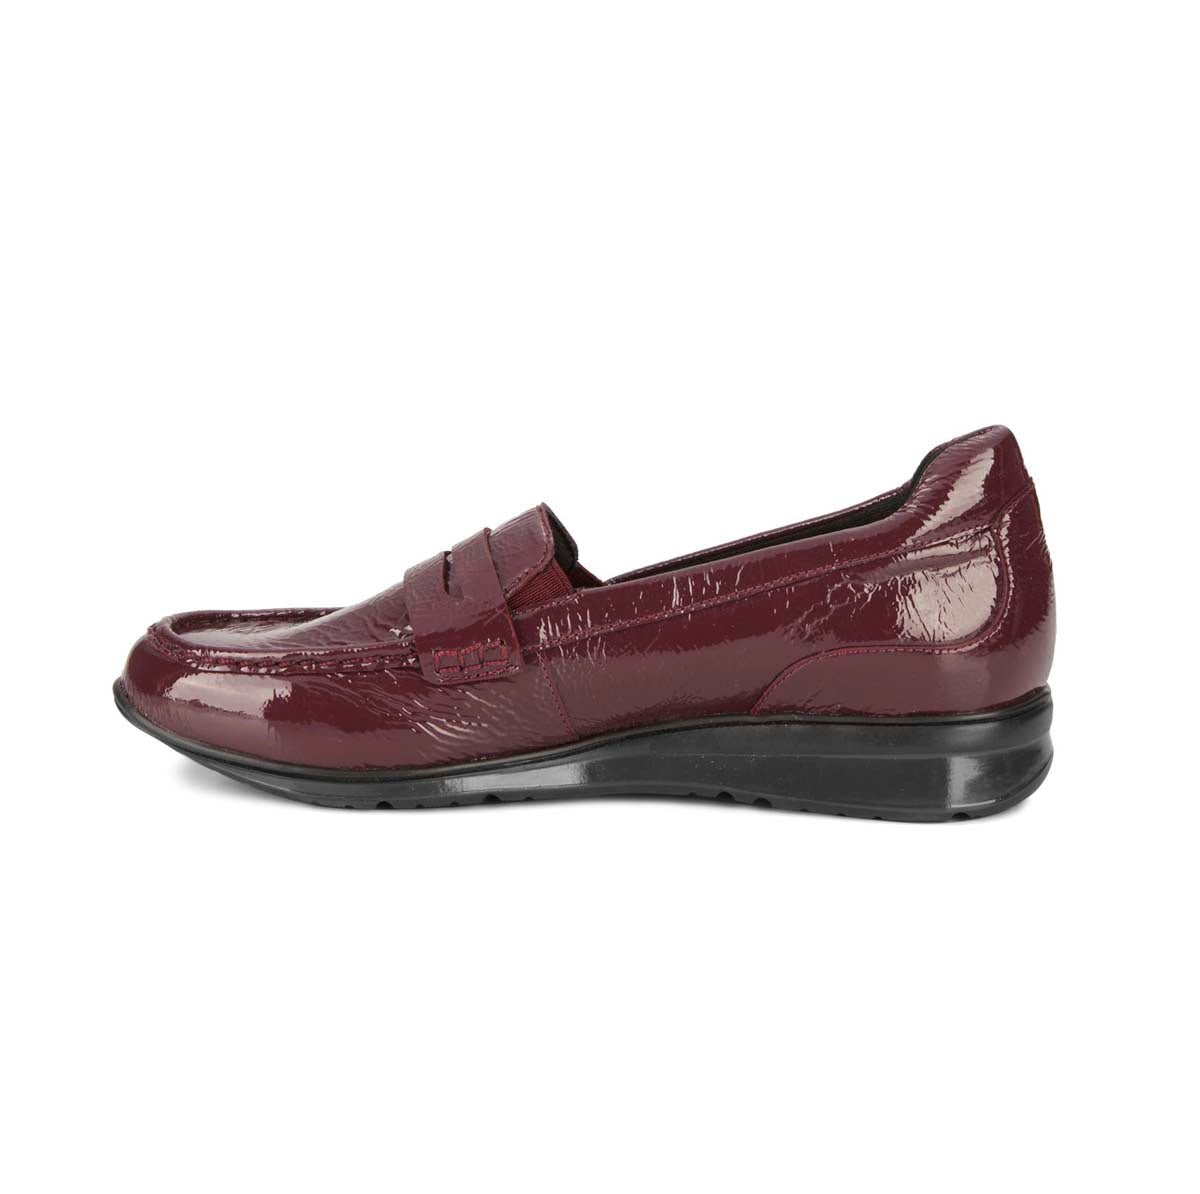 ROS HOMMERSON DANNON WOMEN'S LOAFER SLIP-ON SHOES IN WINE - TLW Shoes